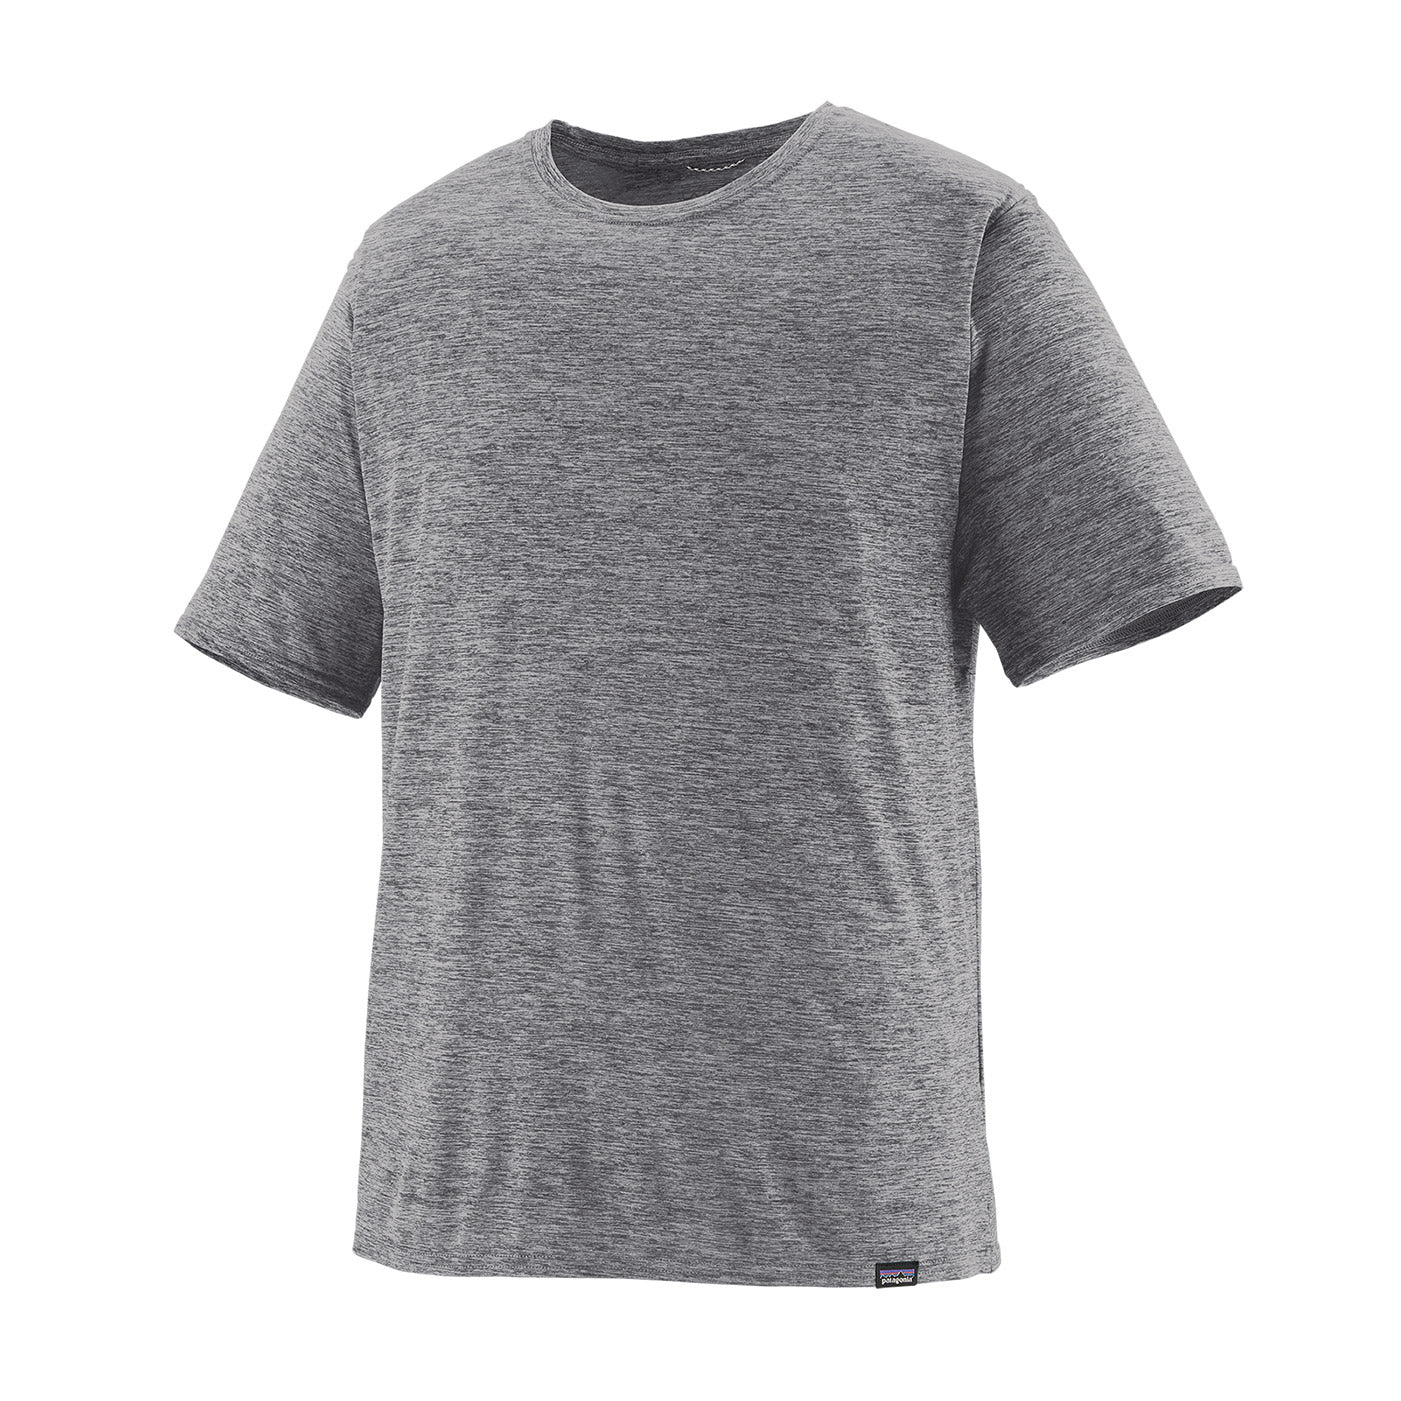 patagonia mens short sleeve capilene cool daily shirt in feather grey, front view